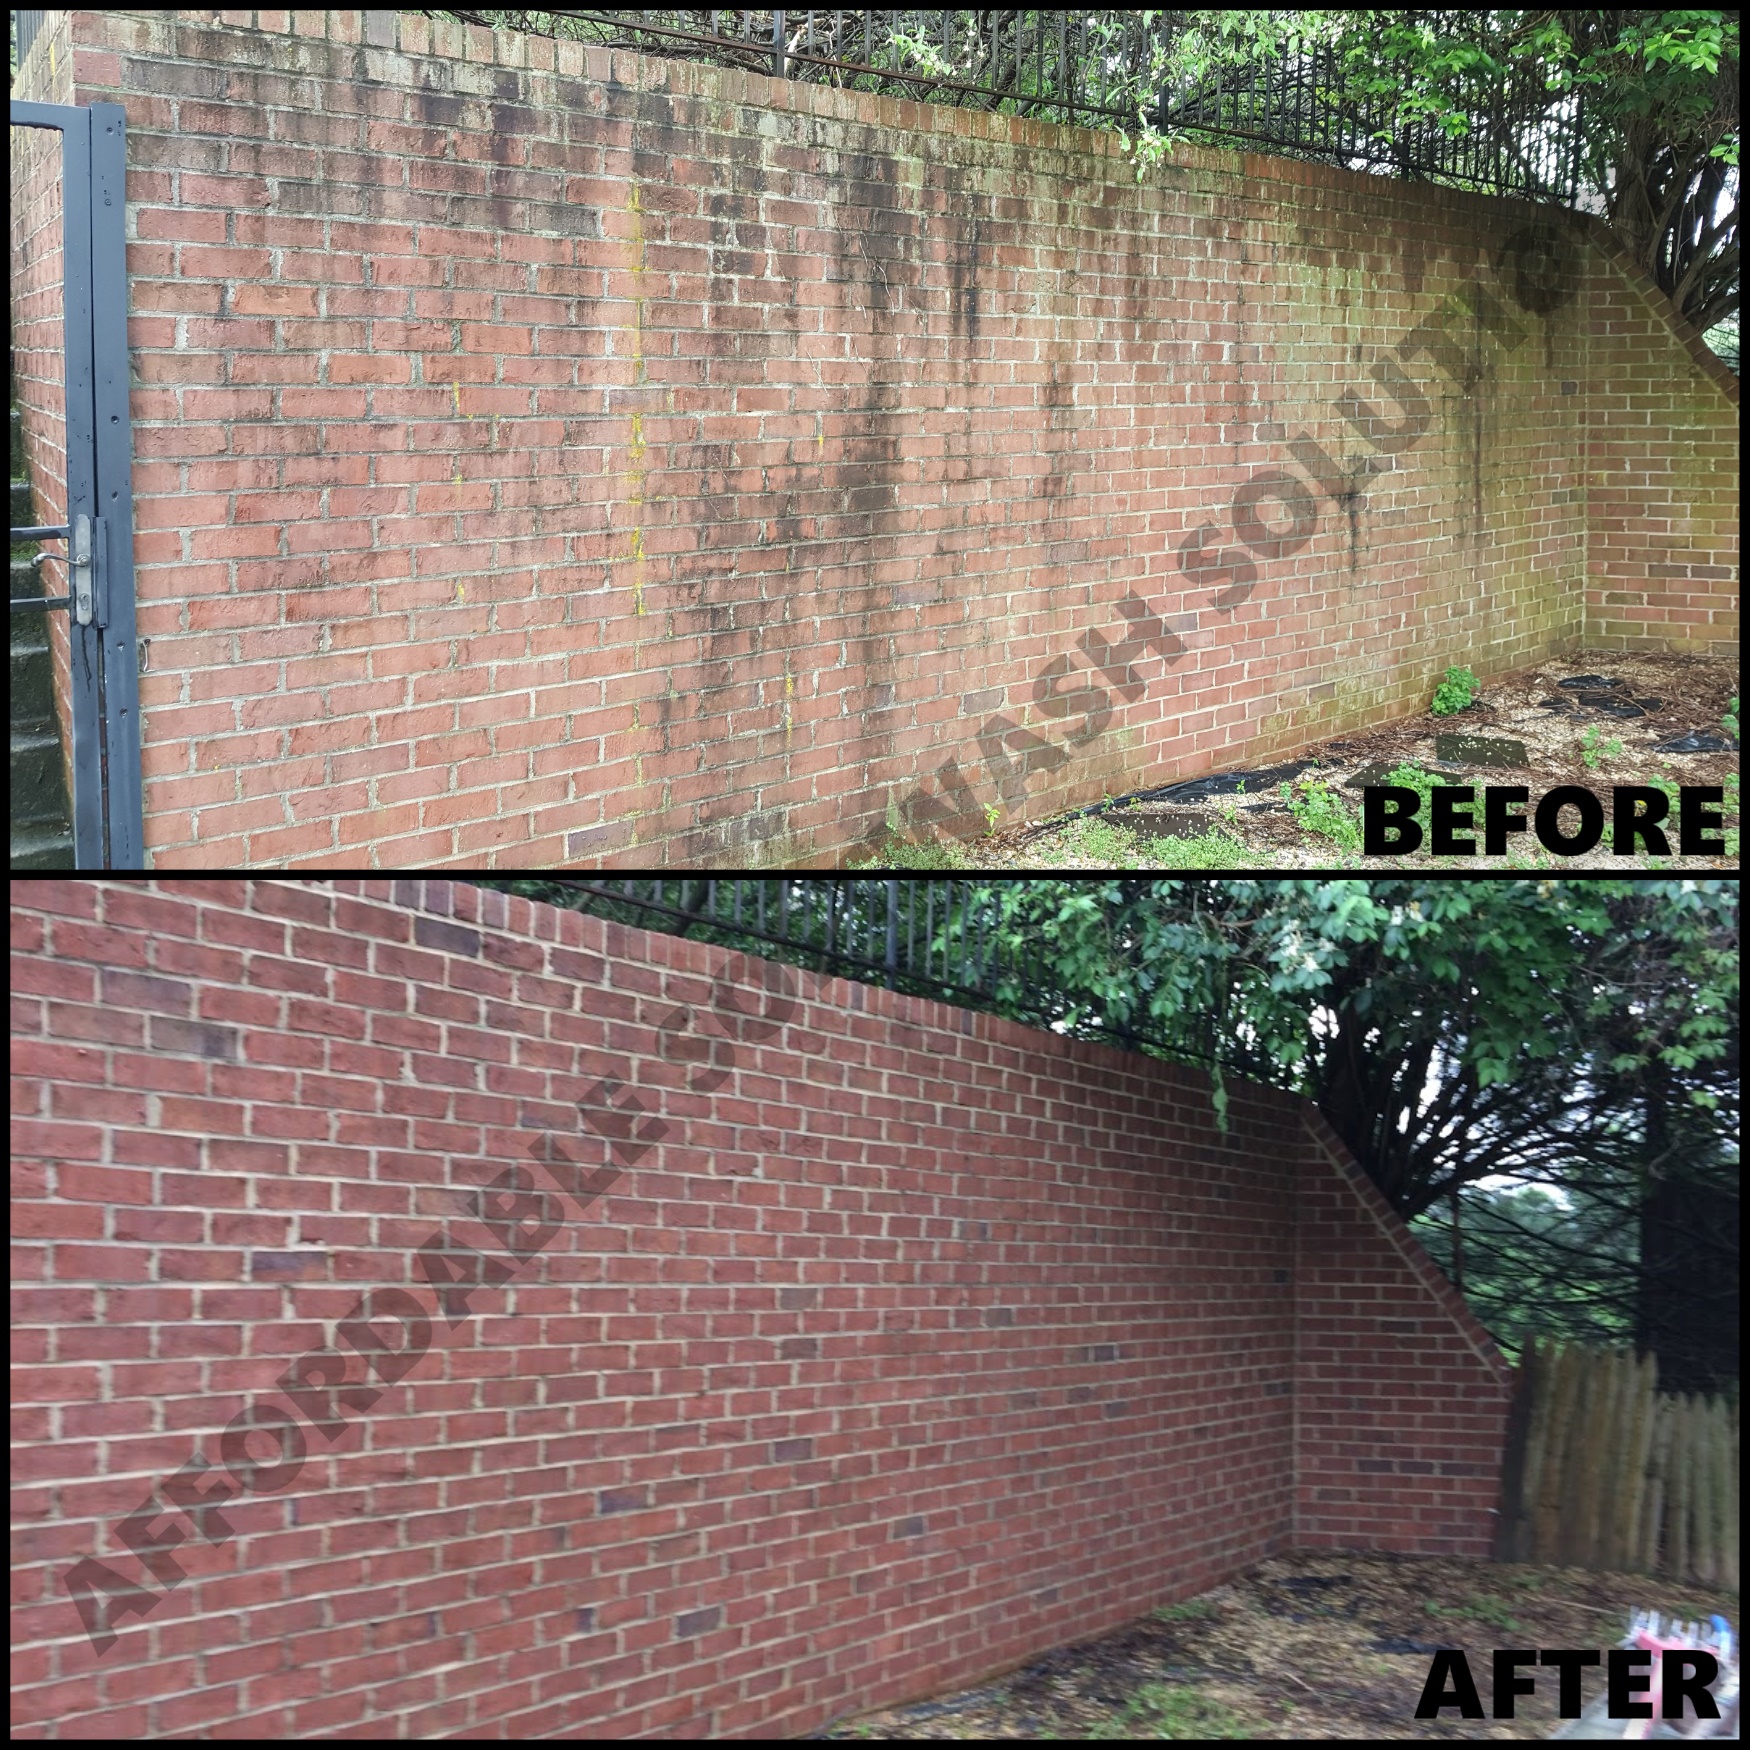 BRICK WALL PATIO BEFORE AND AFTER .jpg